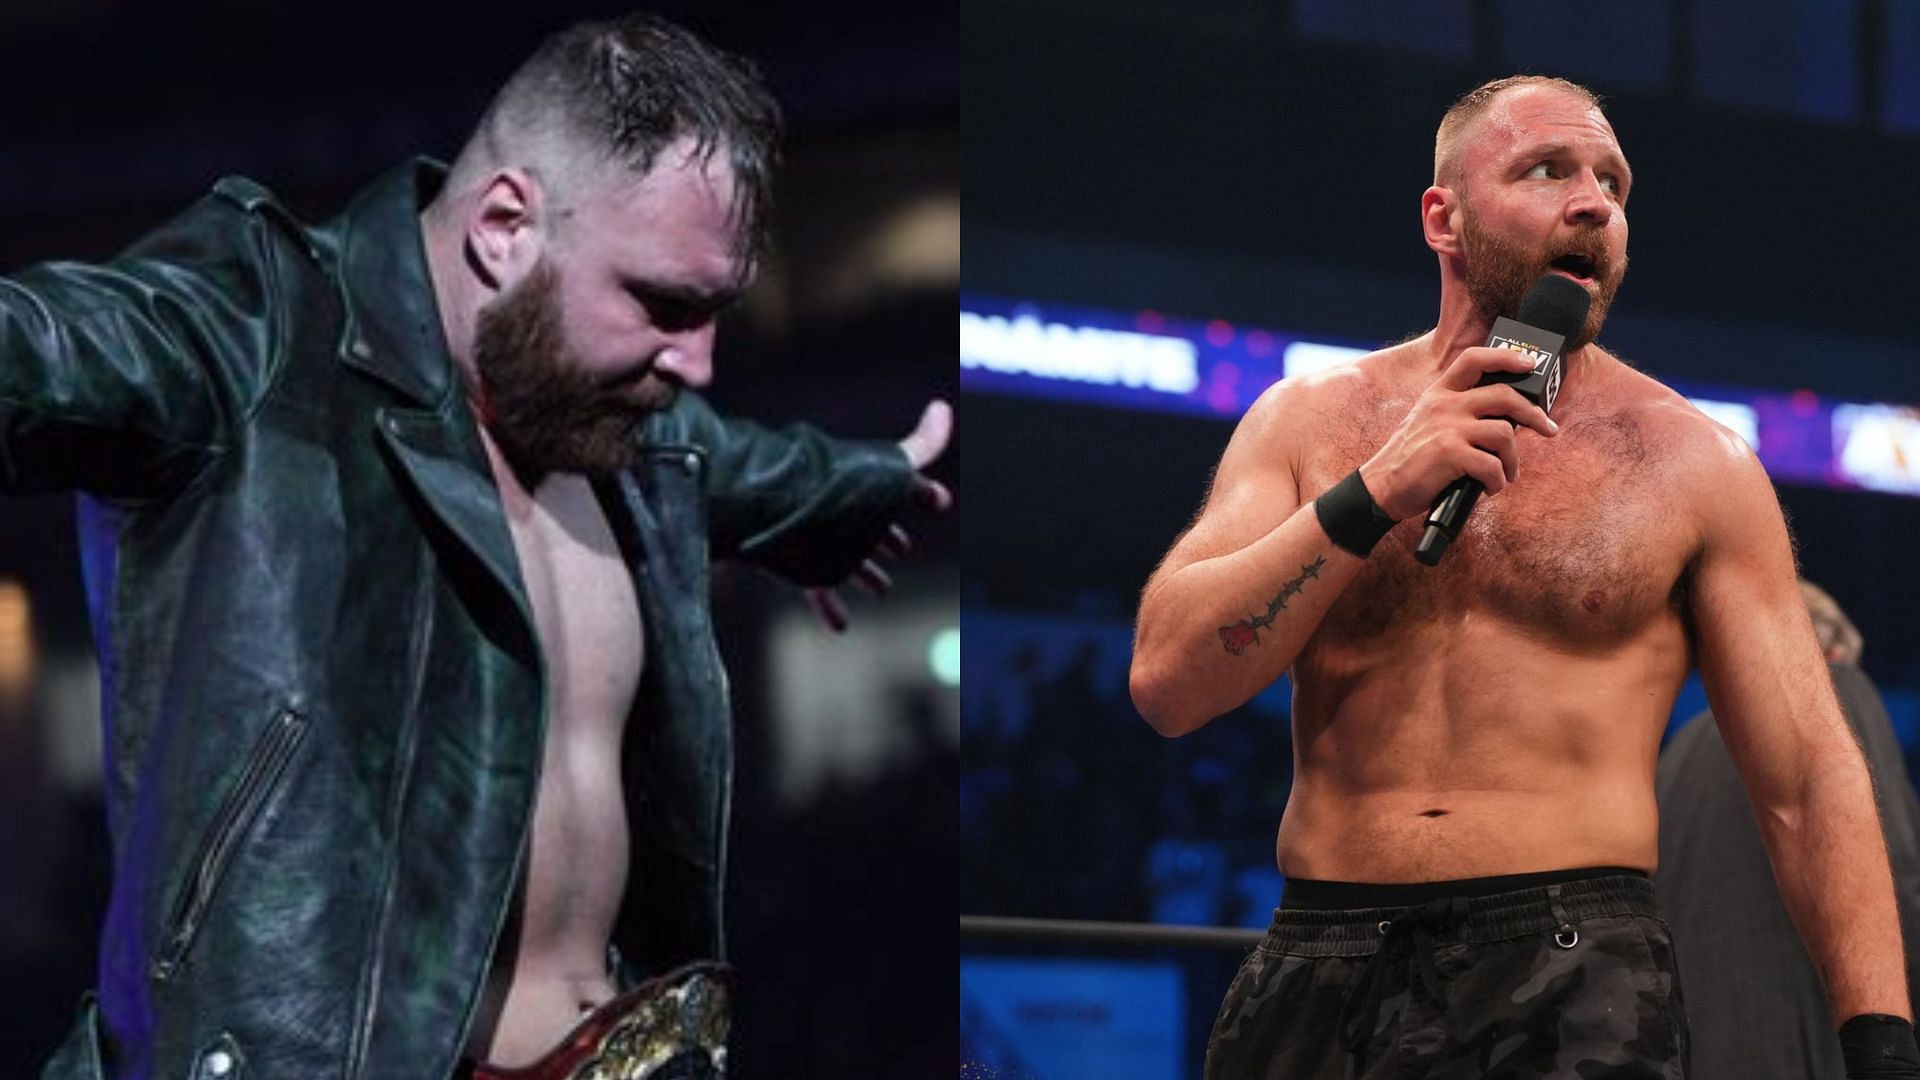 Jon Moxley returned to AEW in January 2022